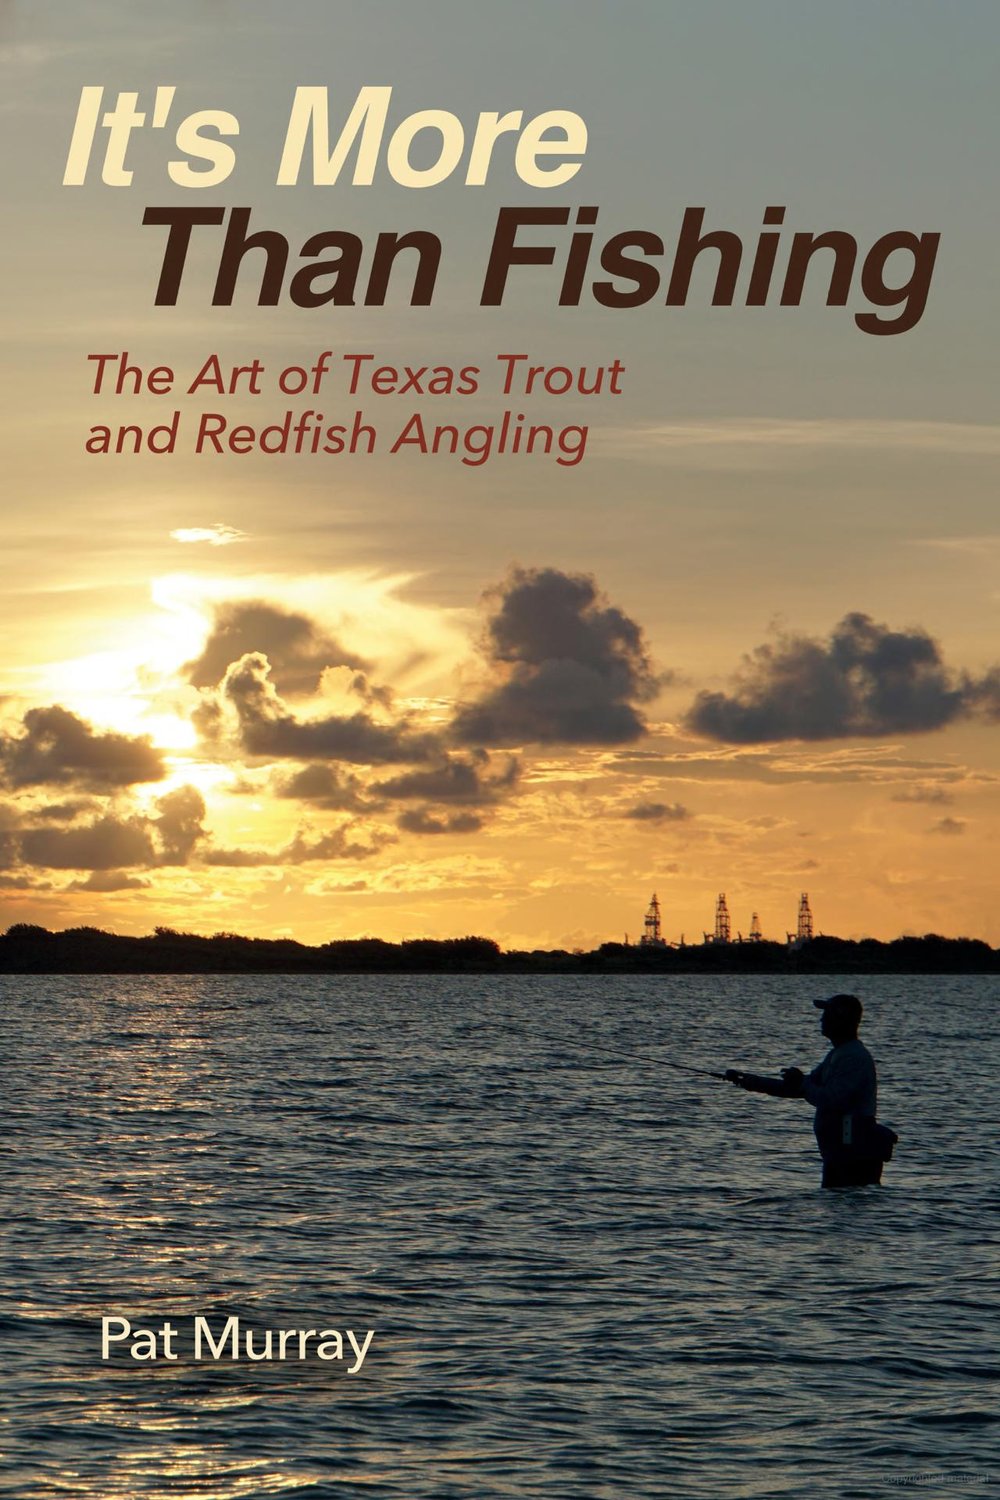 It's More Than Fishing - The Art of Texas Trout and Redfish